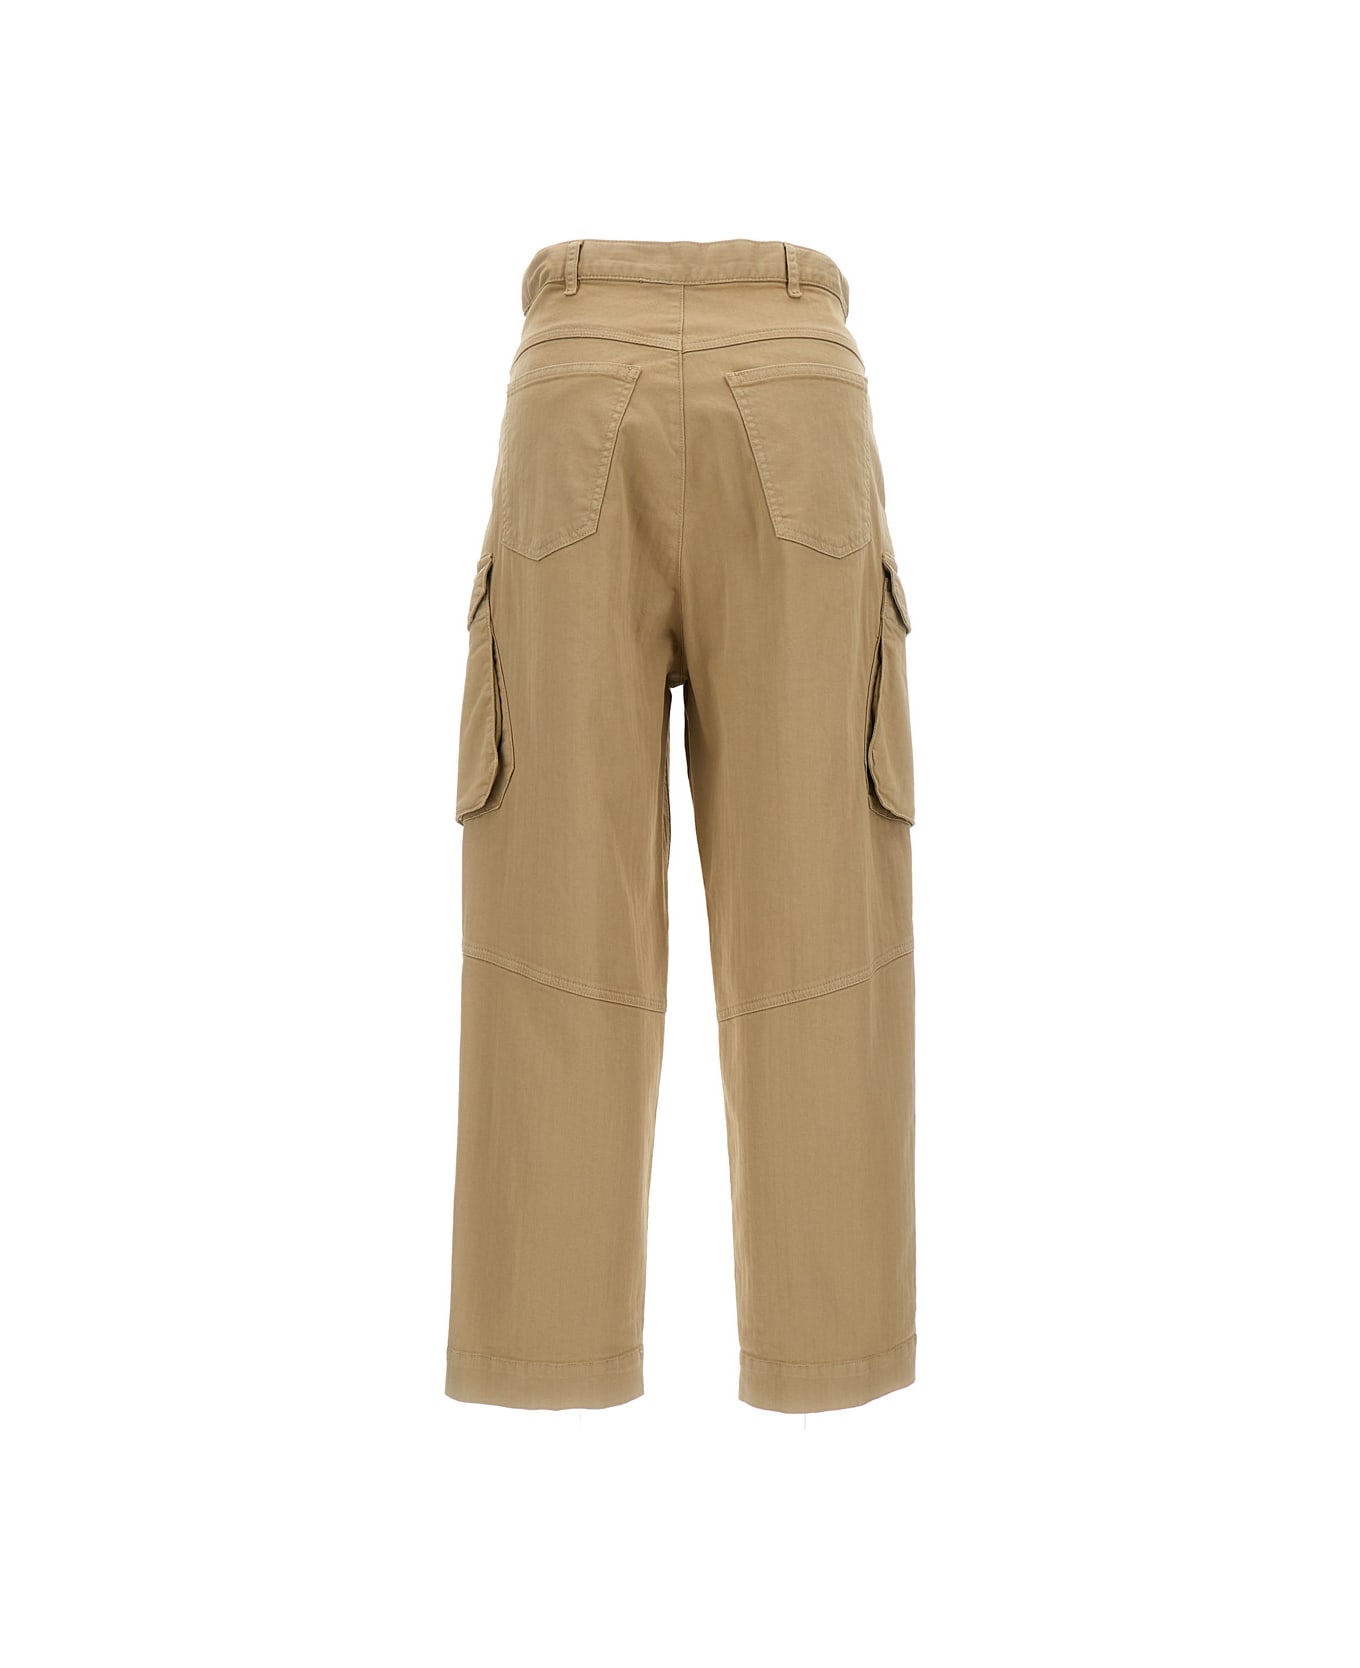 SEMICOUTURE Sand-colored Cargo Pants In Cotton Blend Woman - Beige ボトムス